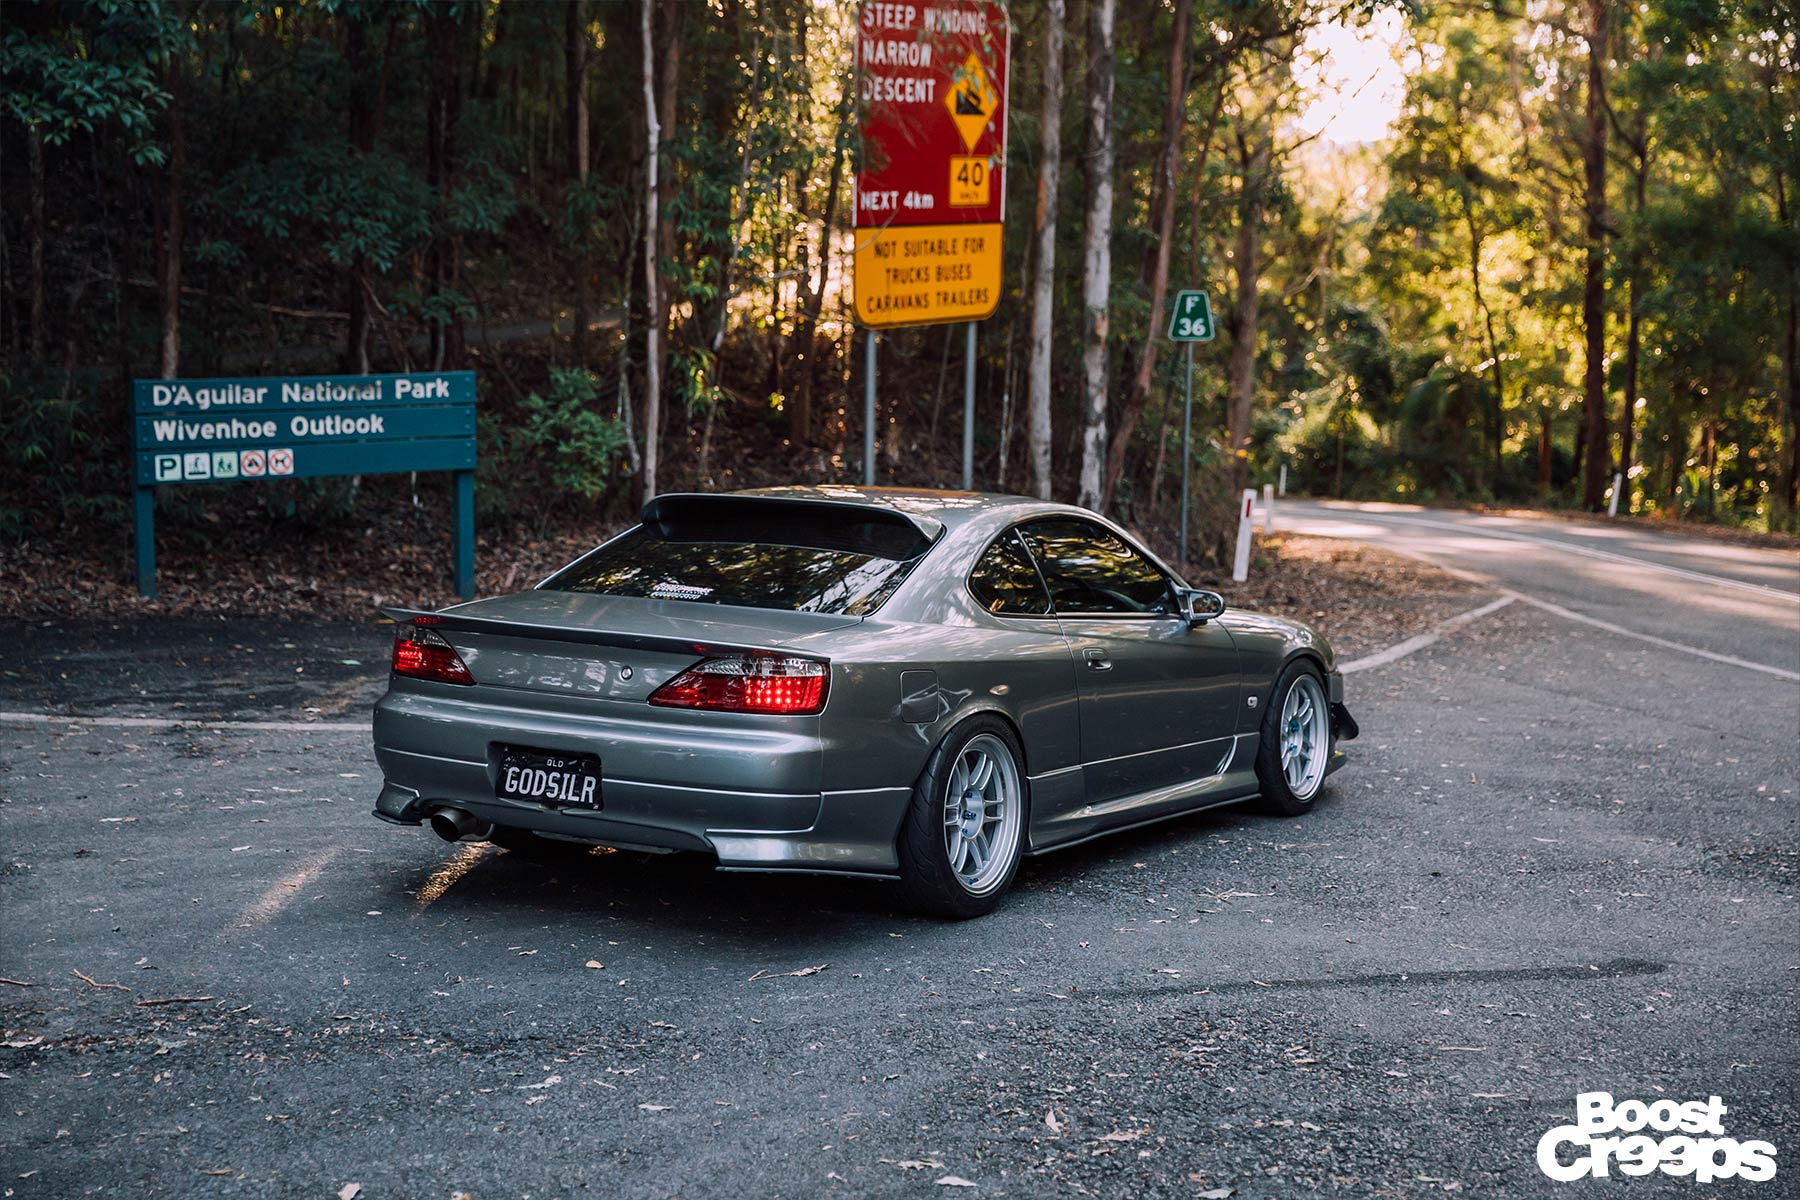 Jordan’s RB26 Powered S15 Is The Perfect Street Car